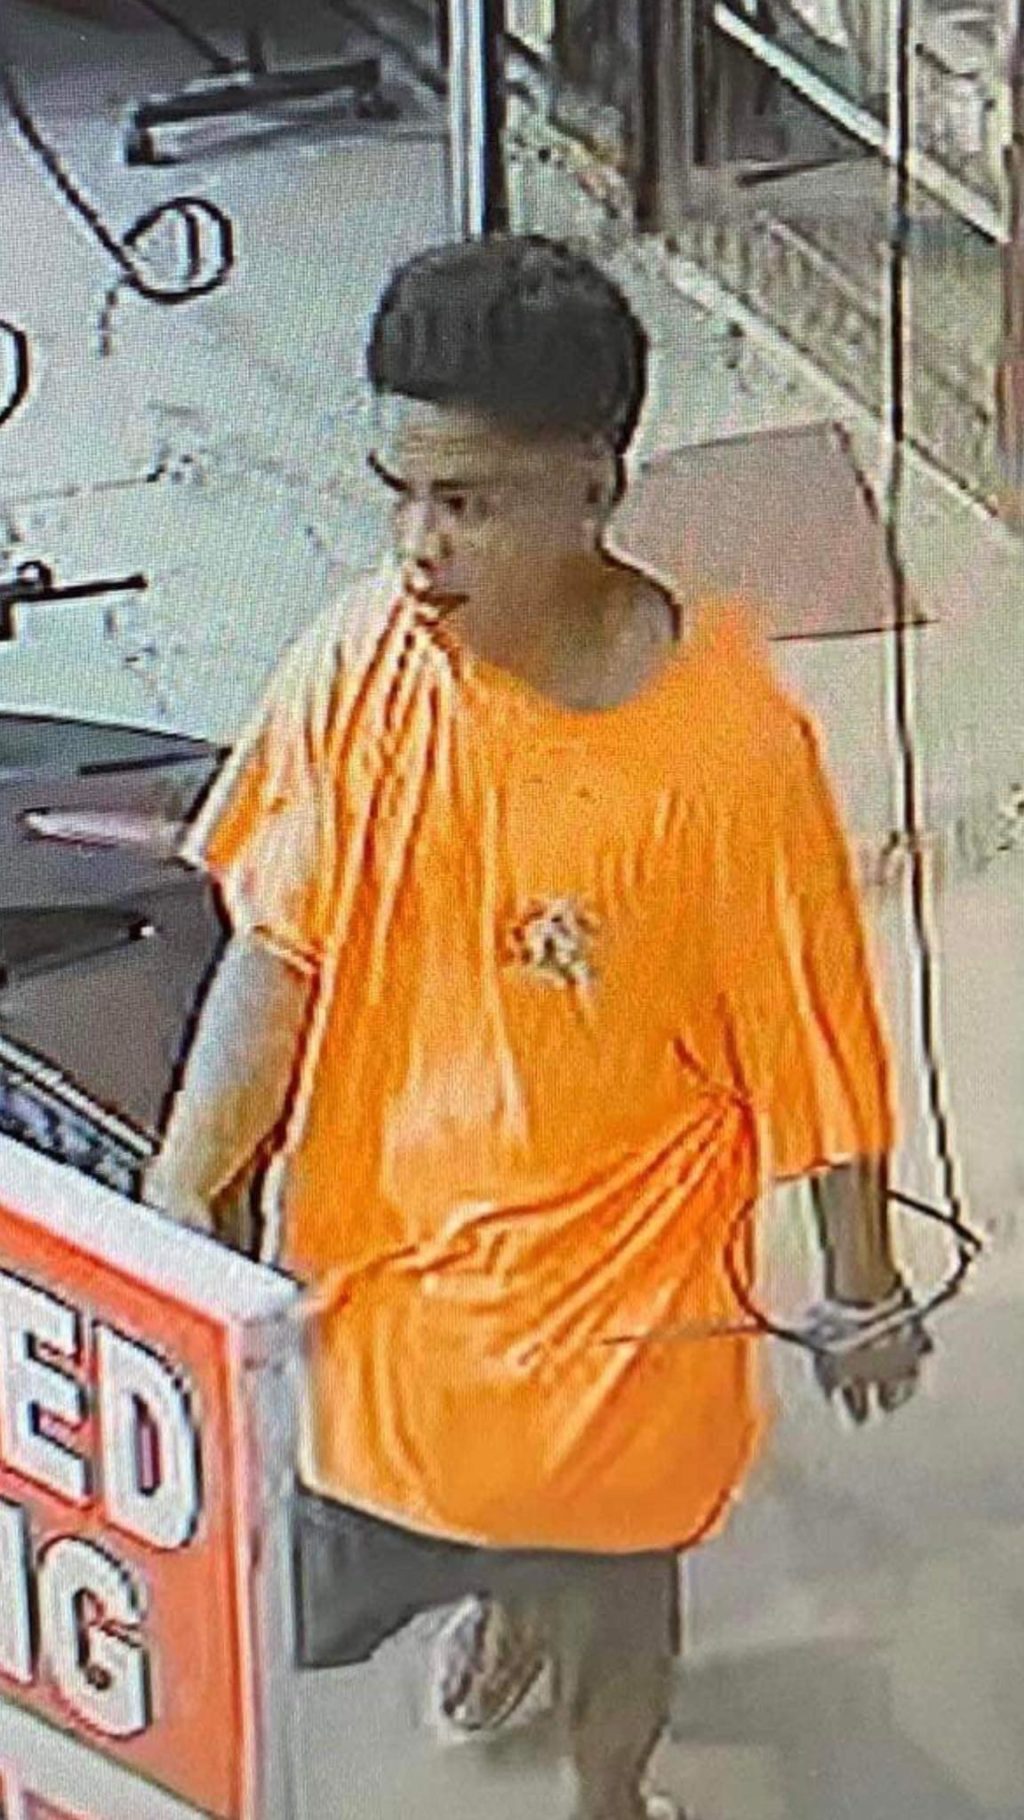 The Mandaue Police Station 3 has posted on its Facebook page a photo of the man, who mauled and allegedly robbed a cashier of a salon this morning, January 30. Police said they were still trying to identify and locate the whereabouts of the attacker and robber. | Photo courtesy of Police Station 3